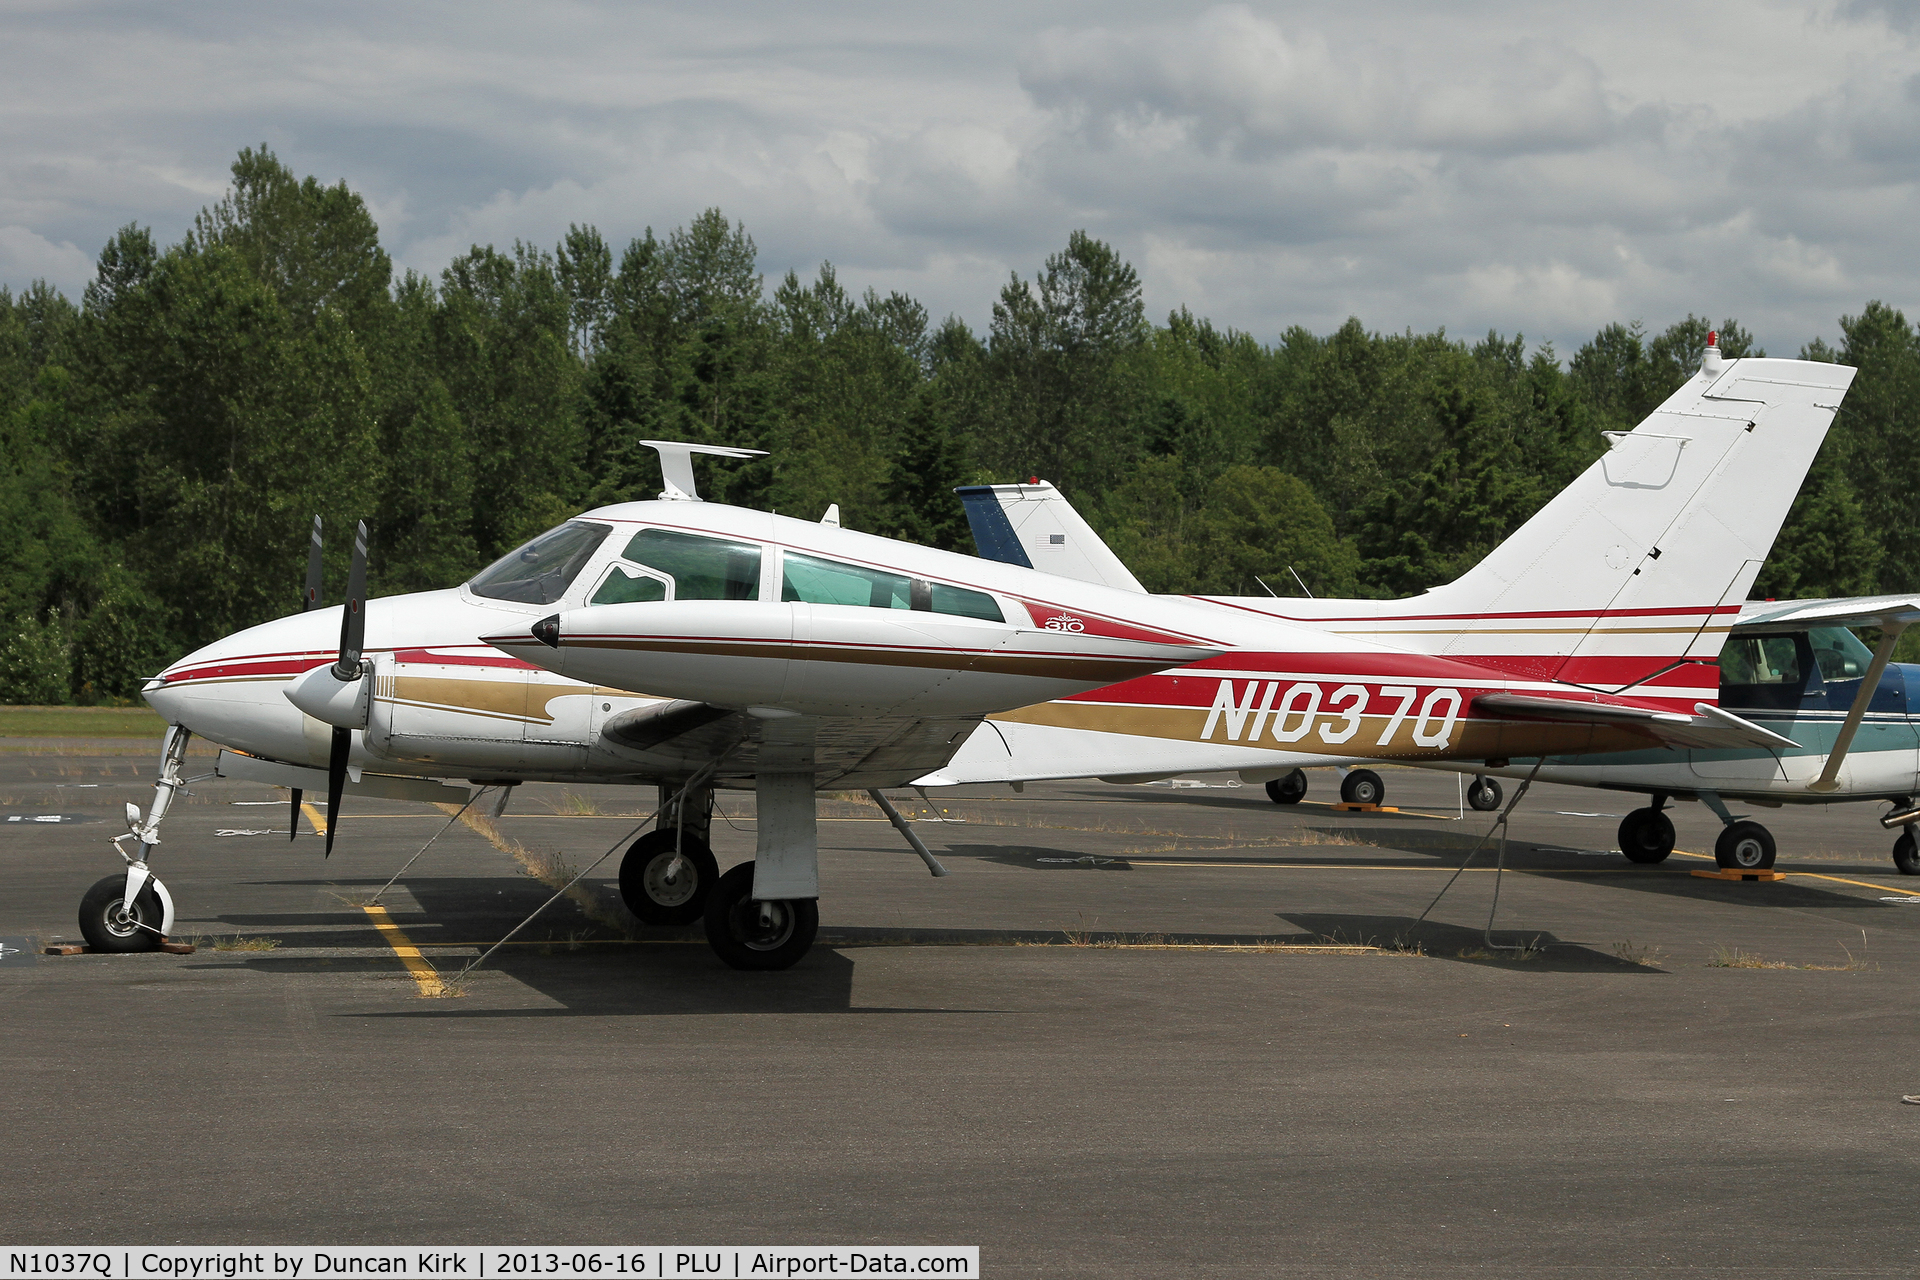 N1037Q, 1963 Cessna 310H C/N 310H0037, 50 years old and still looking hot!